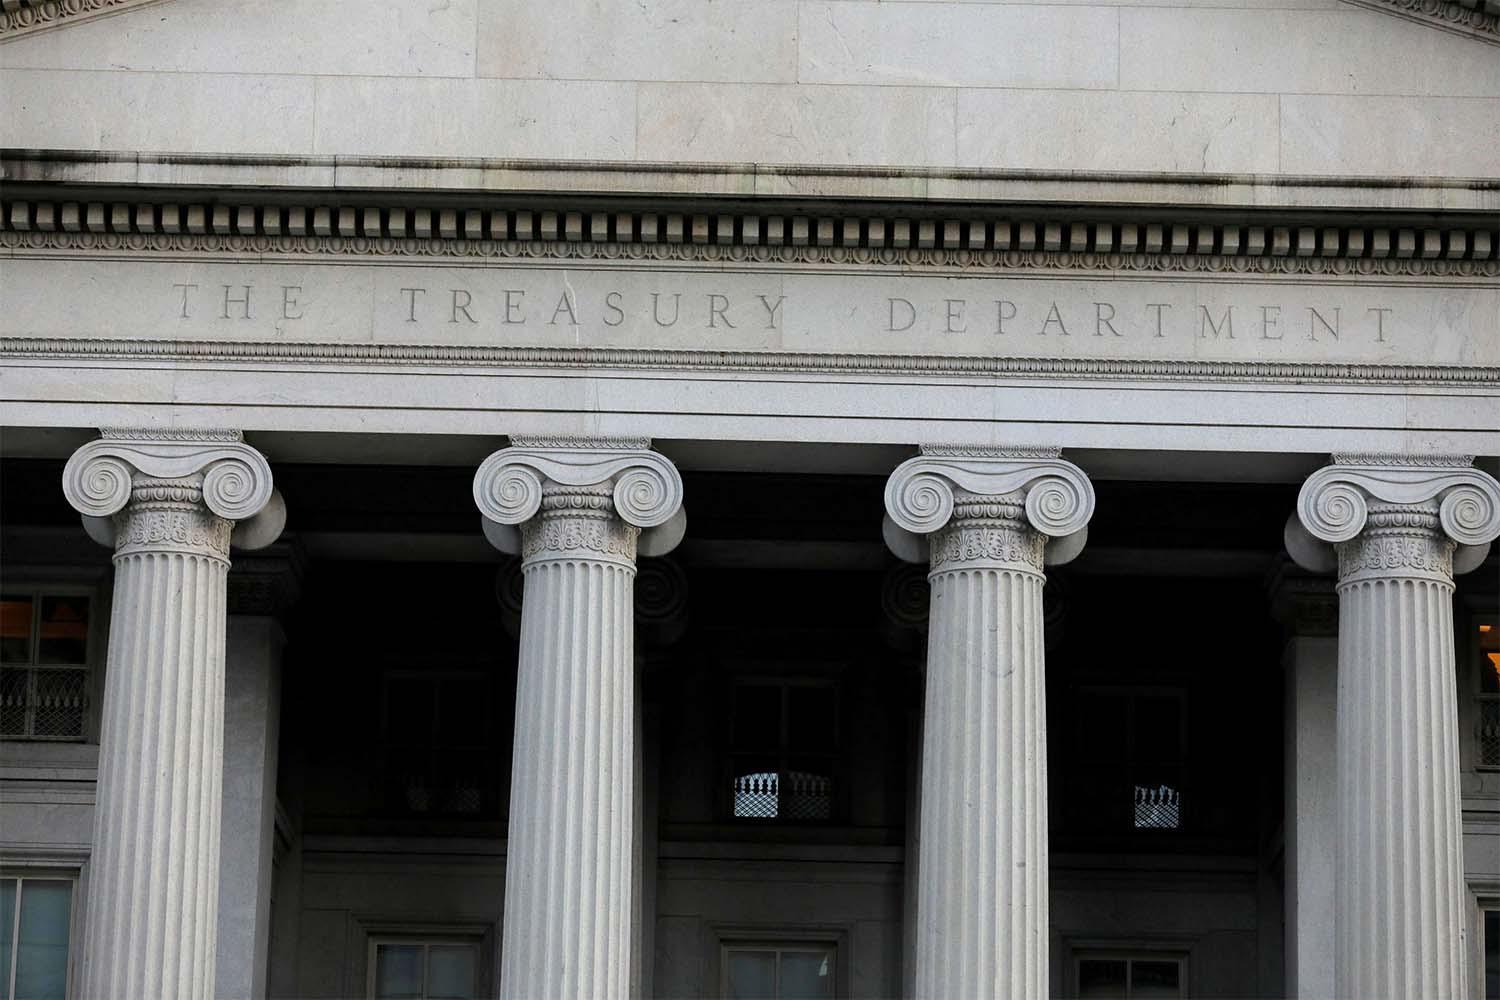 The Chinese individuals and entities are put on the US Treasury Department's Specially Designated Nationals list